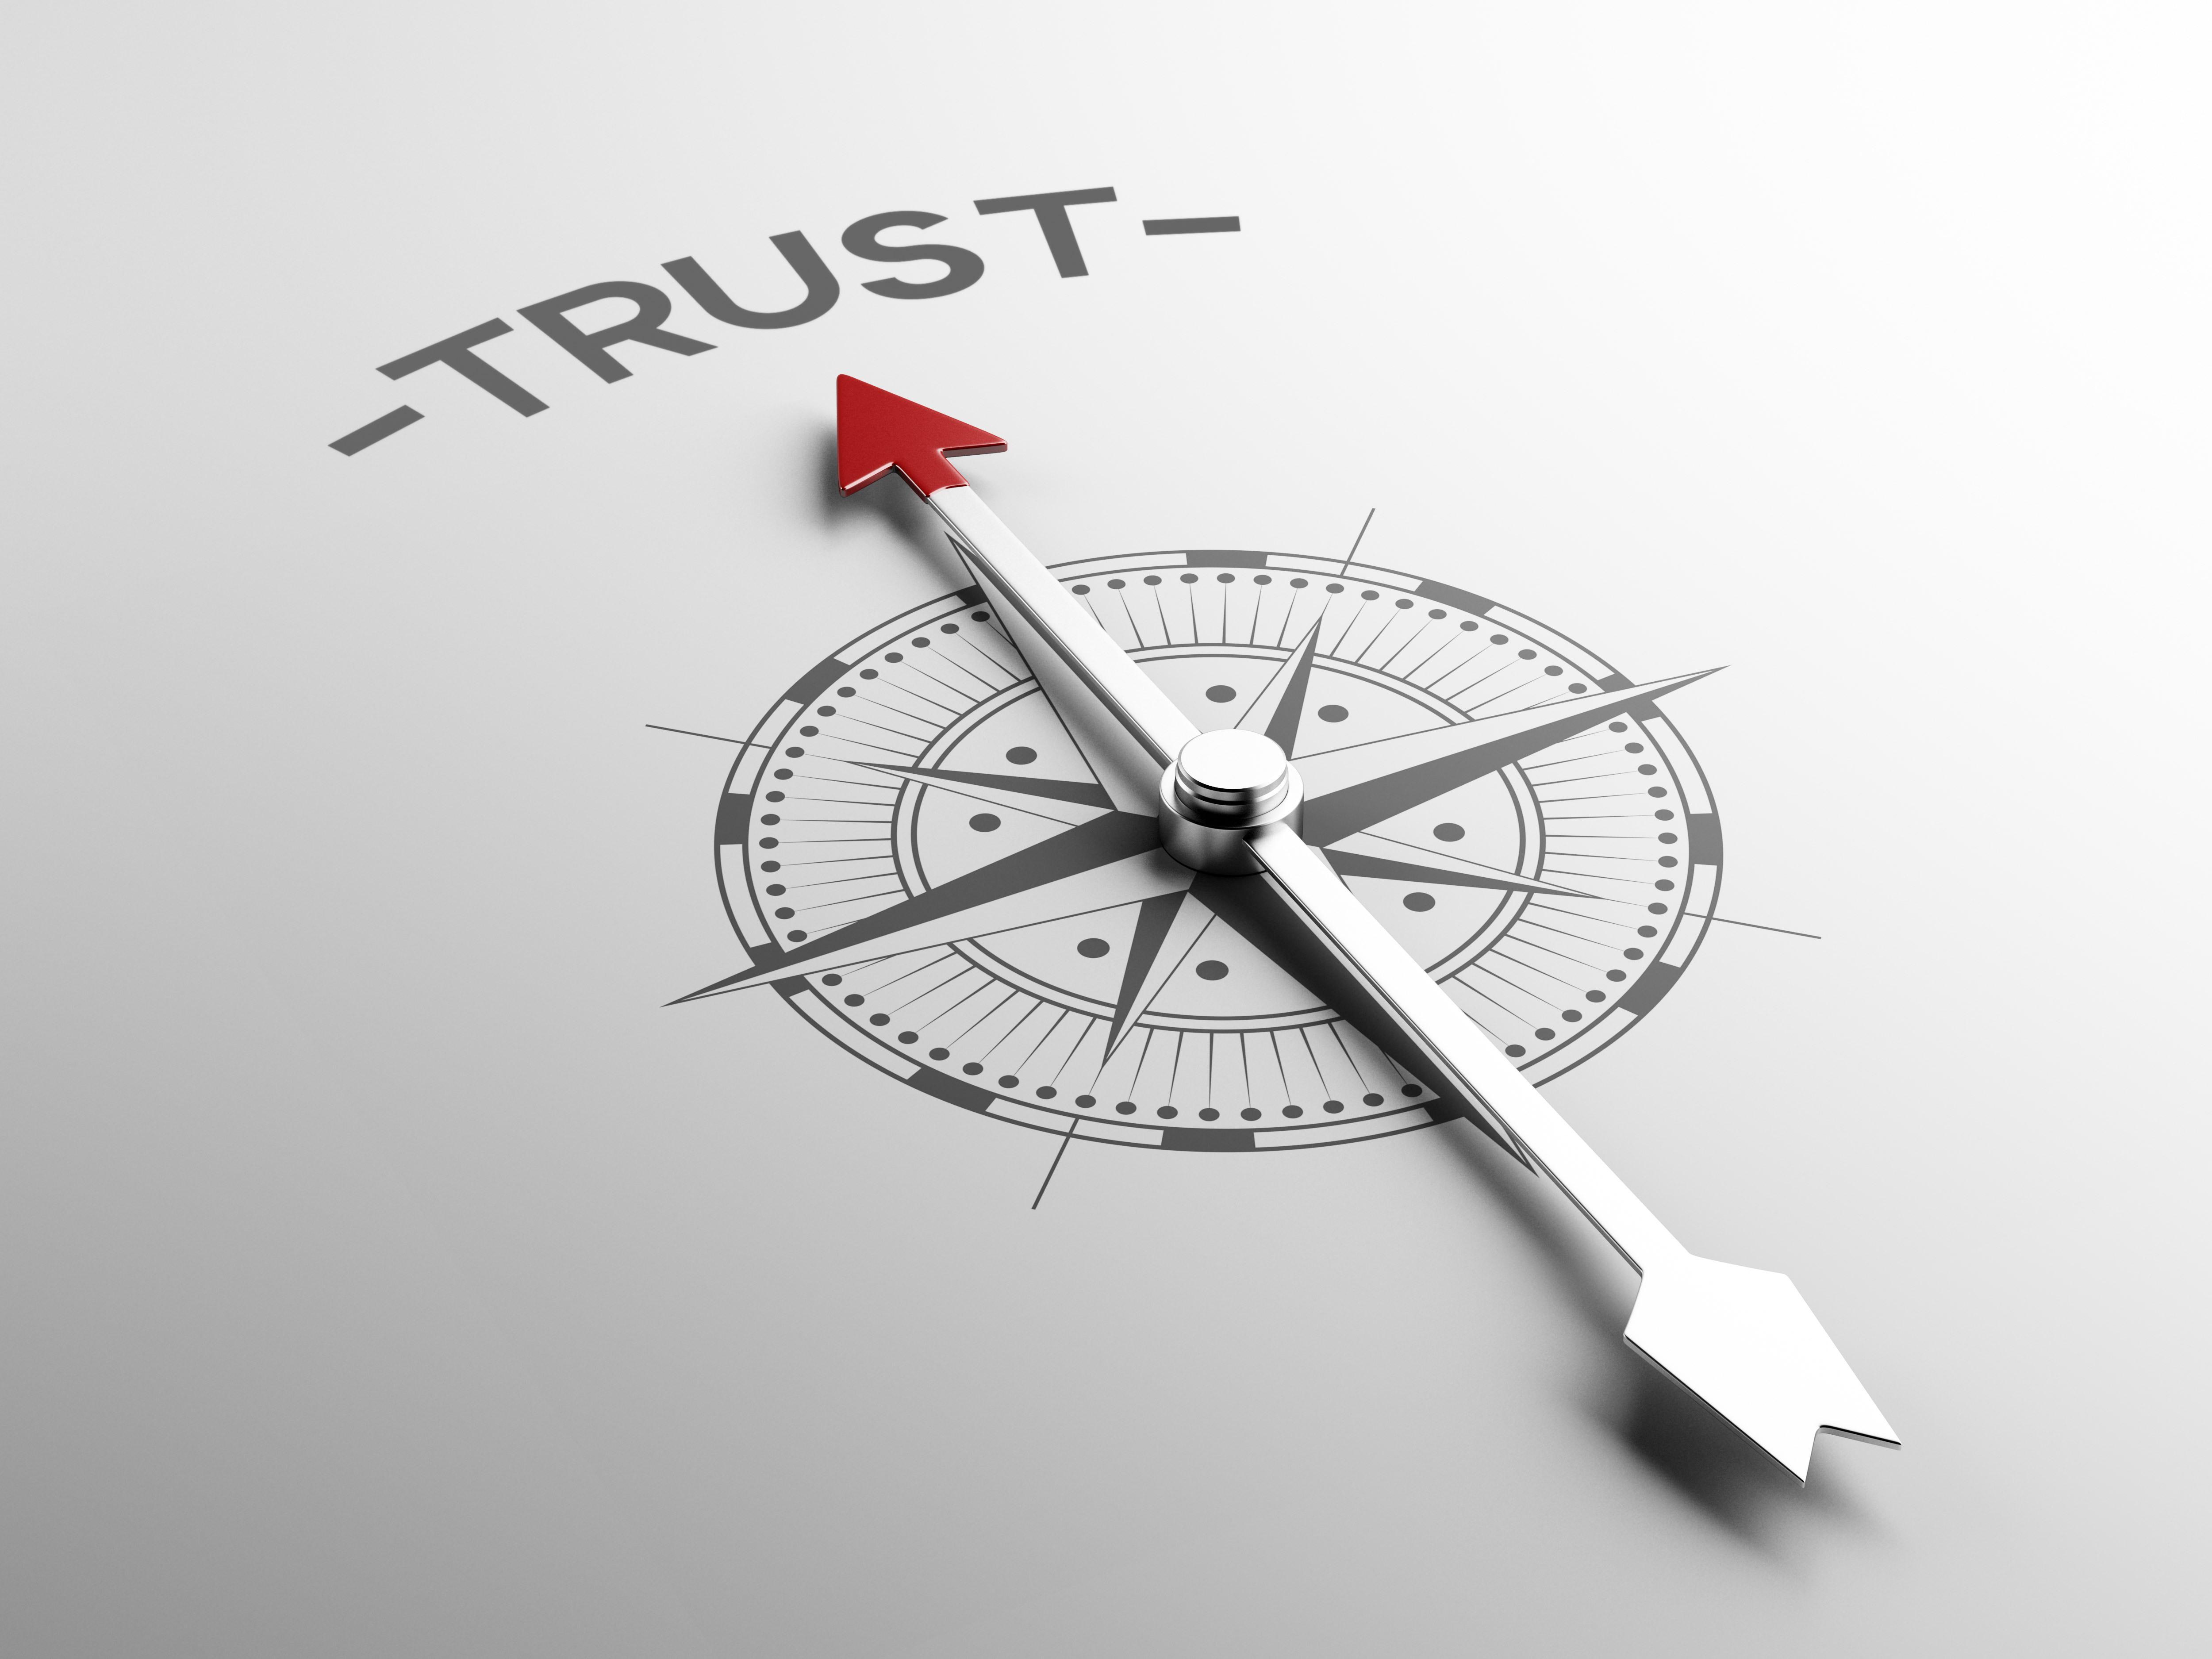 Trust with compass Shutterstock Image